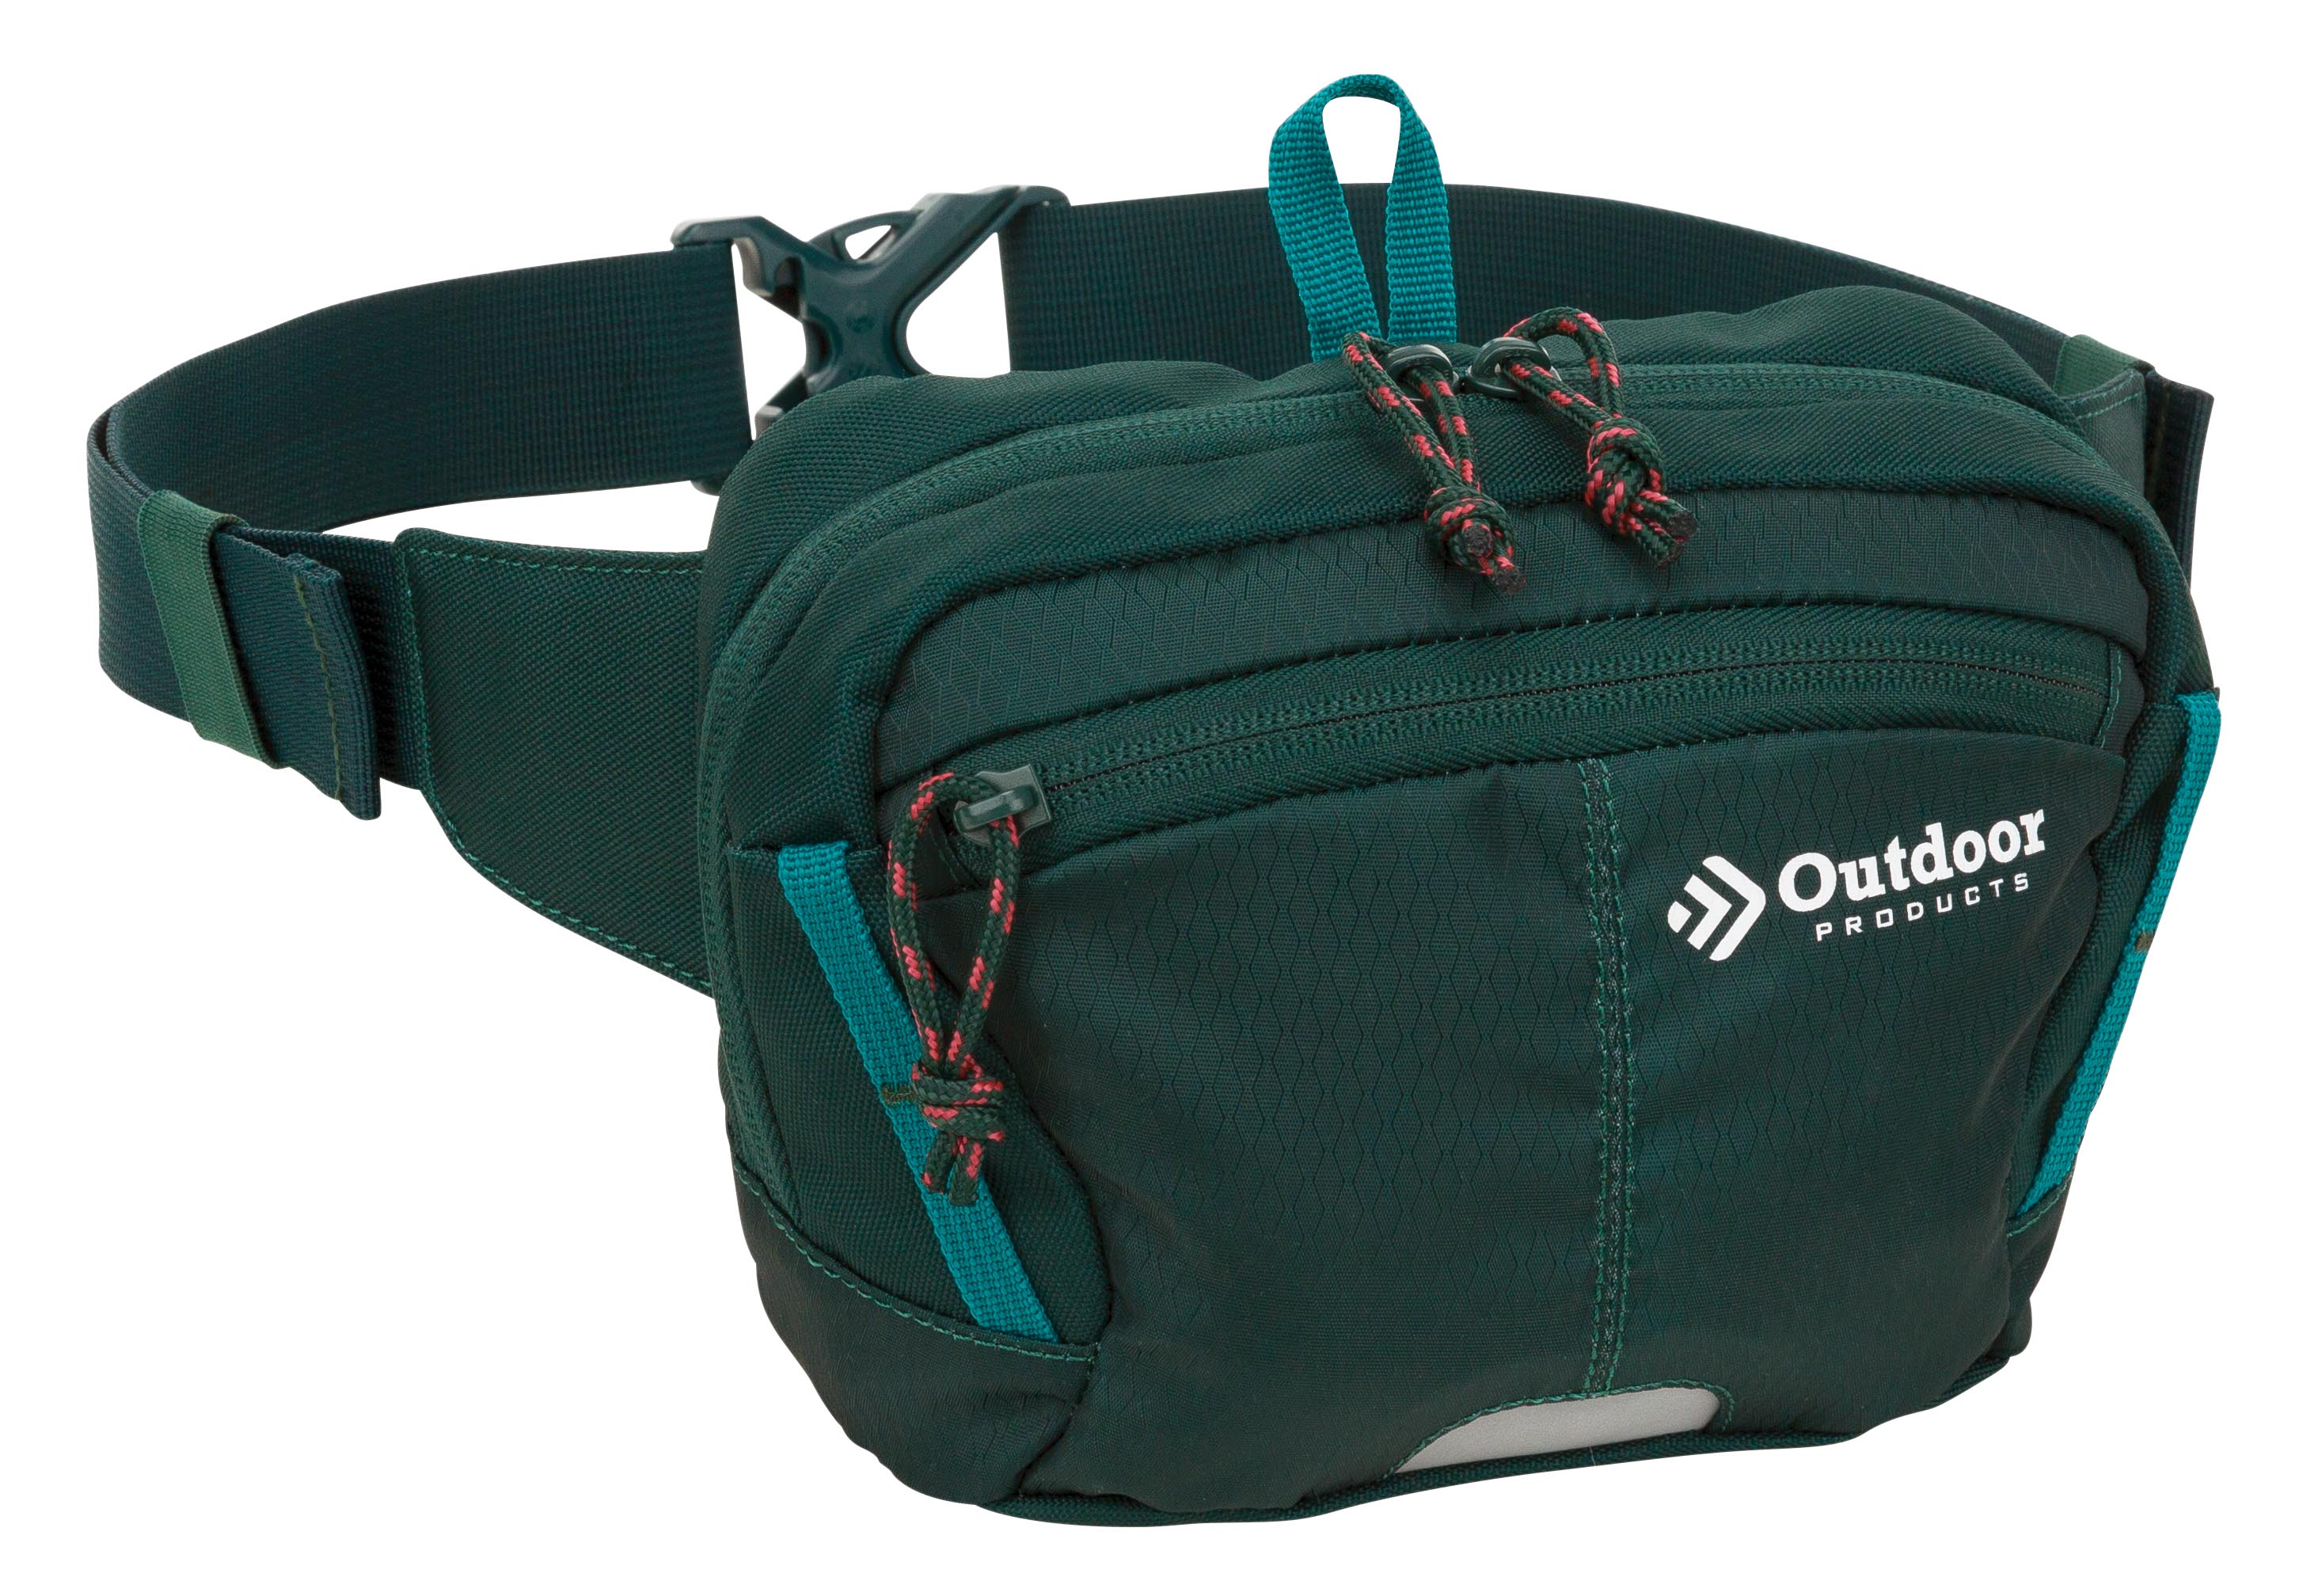 Outdoor Products and Is-Ness have teamed up to create a pouch that